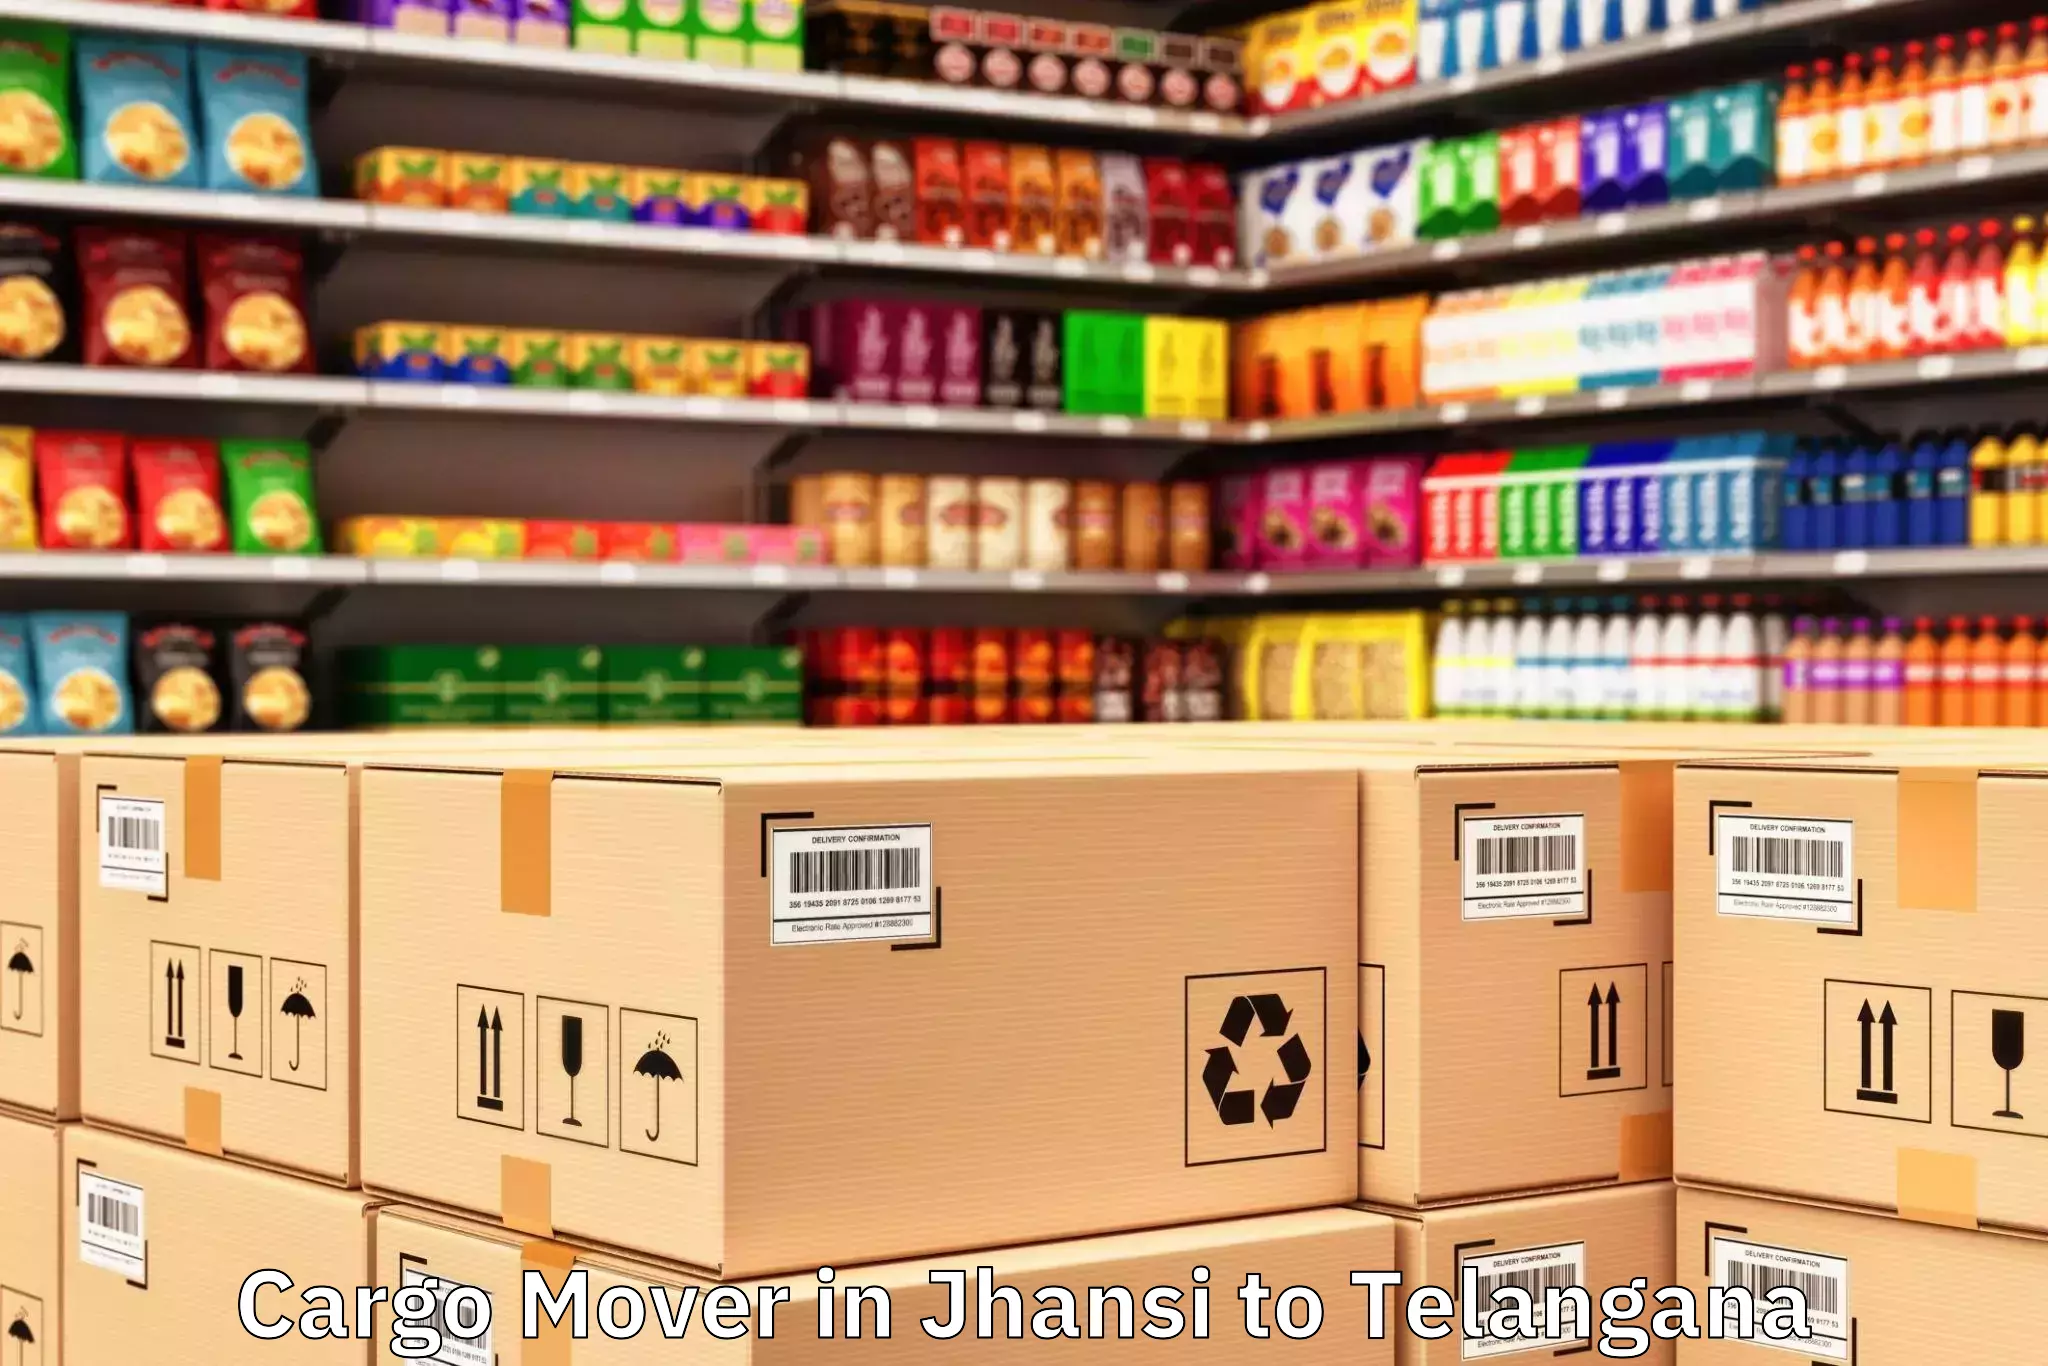 Affordable Jhansi to Hyderabad Cargo Mover